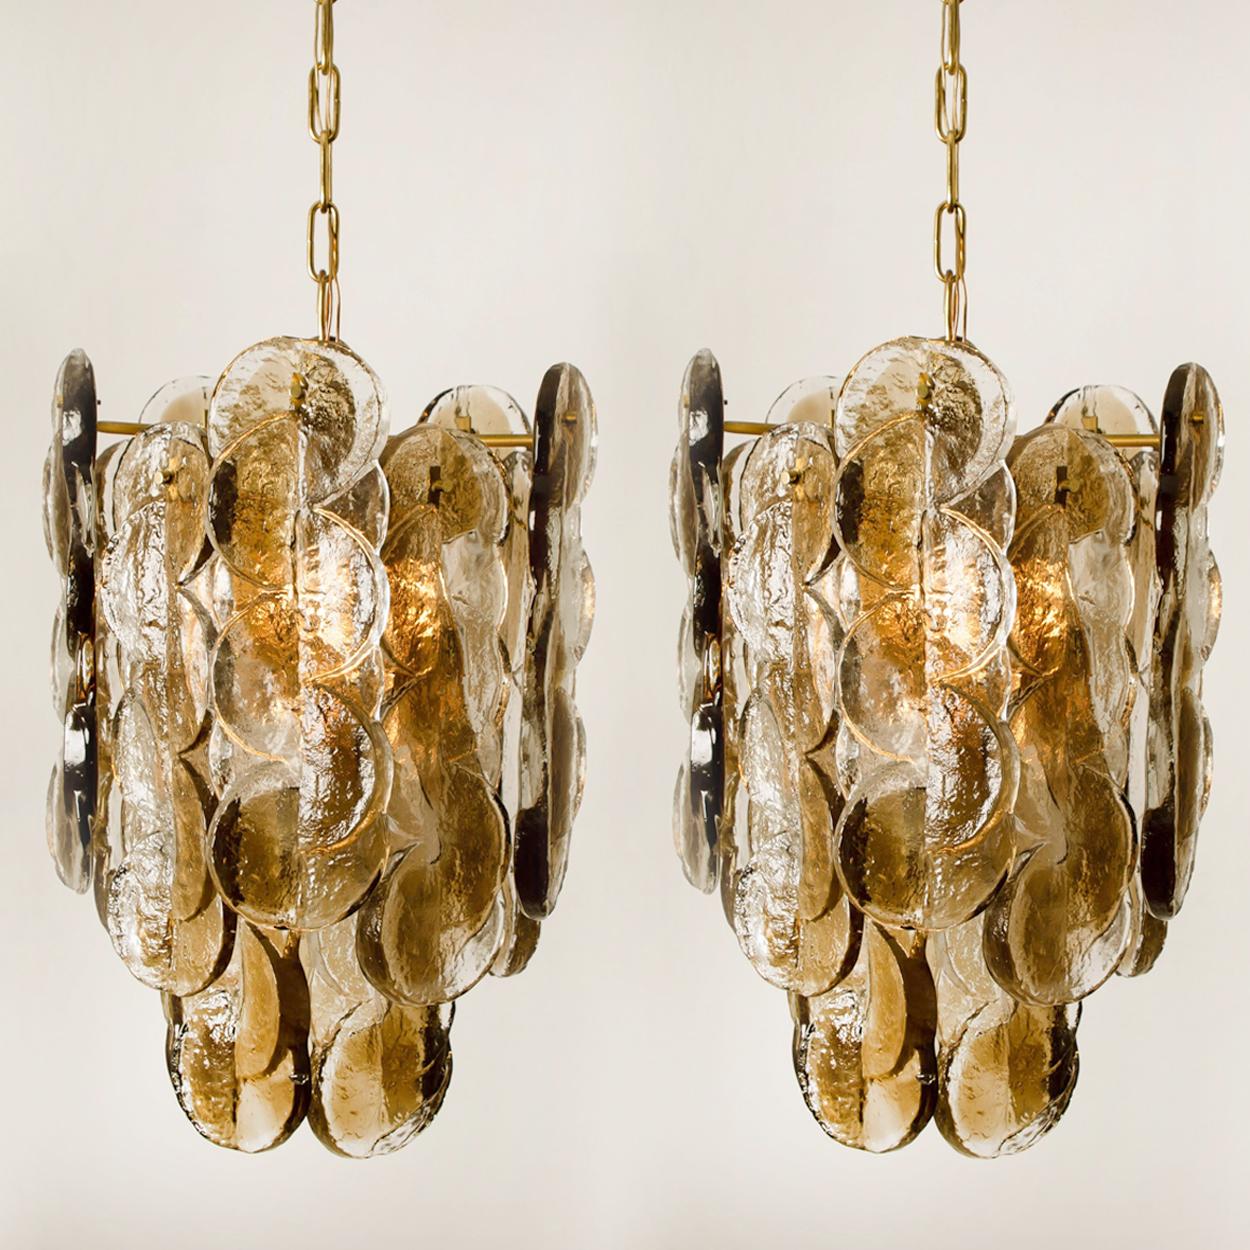 Pair of Large Kalmar Chandeliers Citrus Swirl Smoked Glass, Austria, 1969 For Sale 1